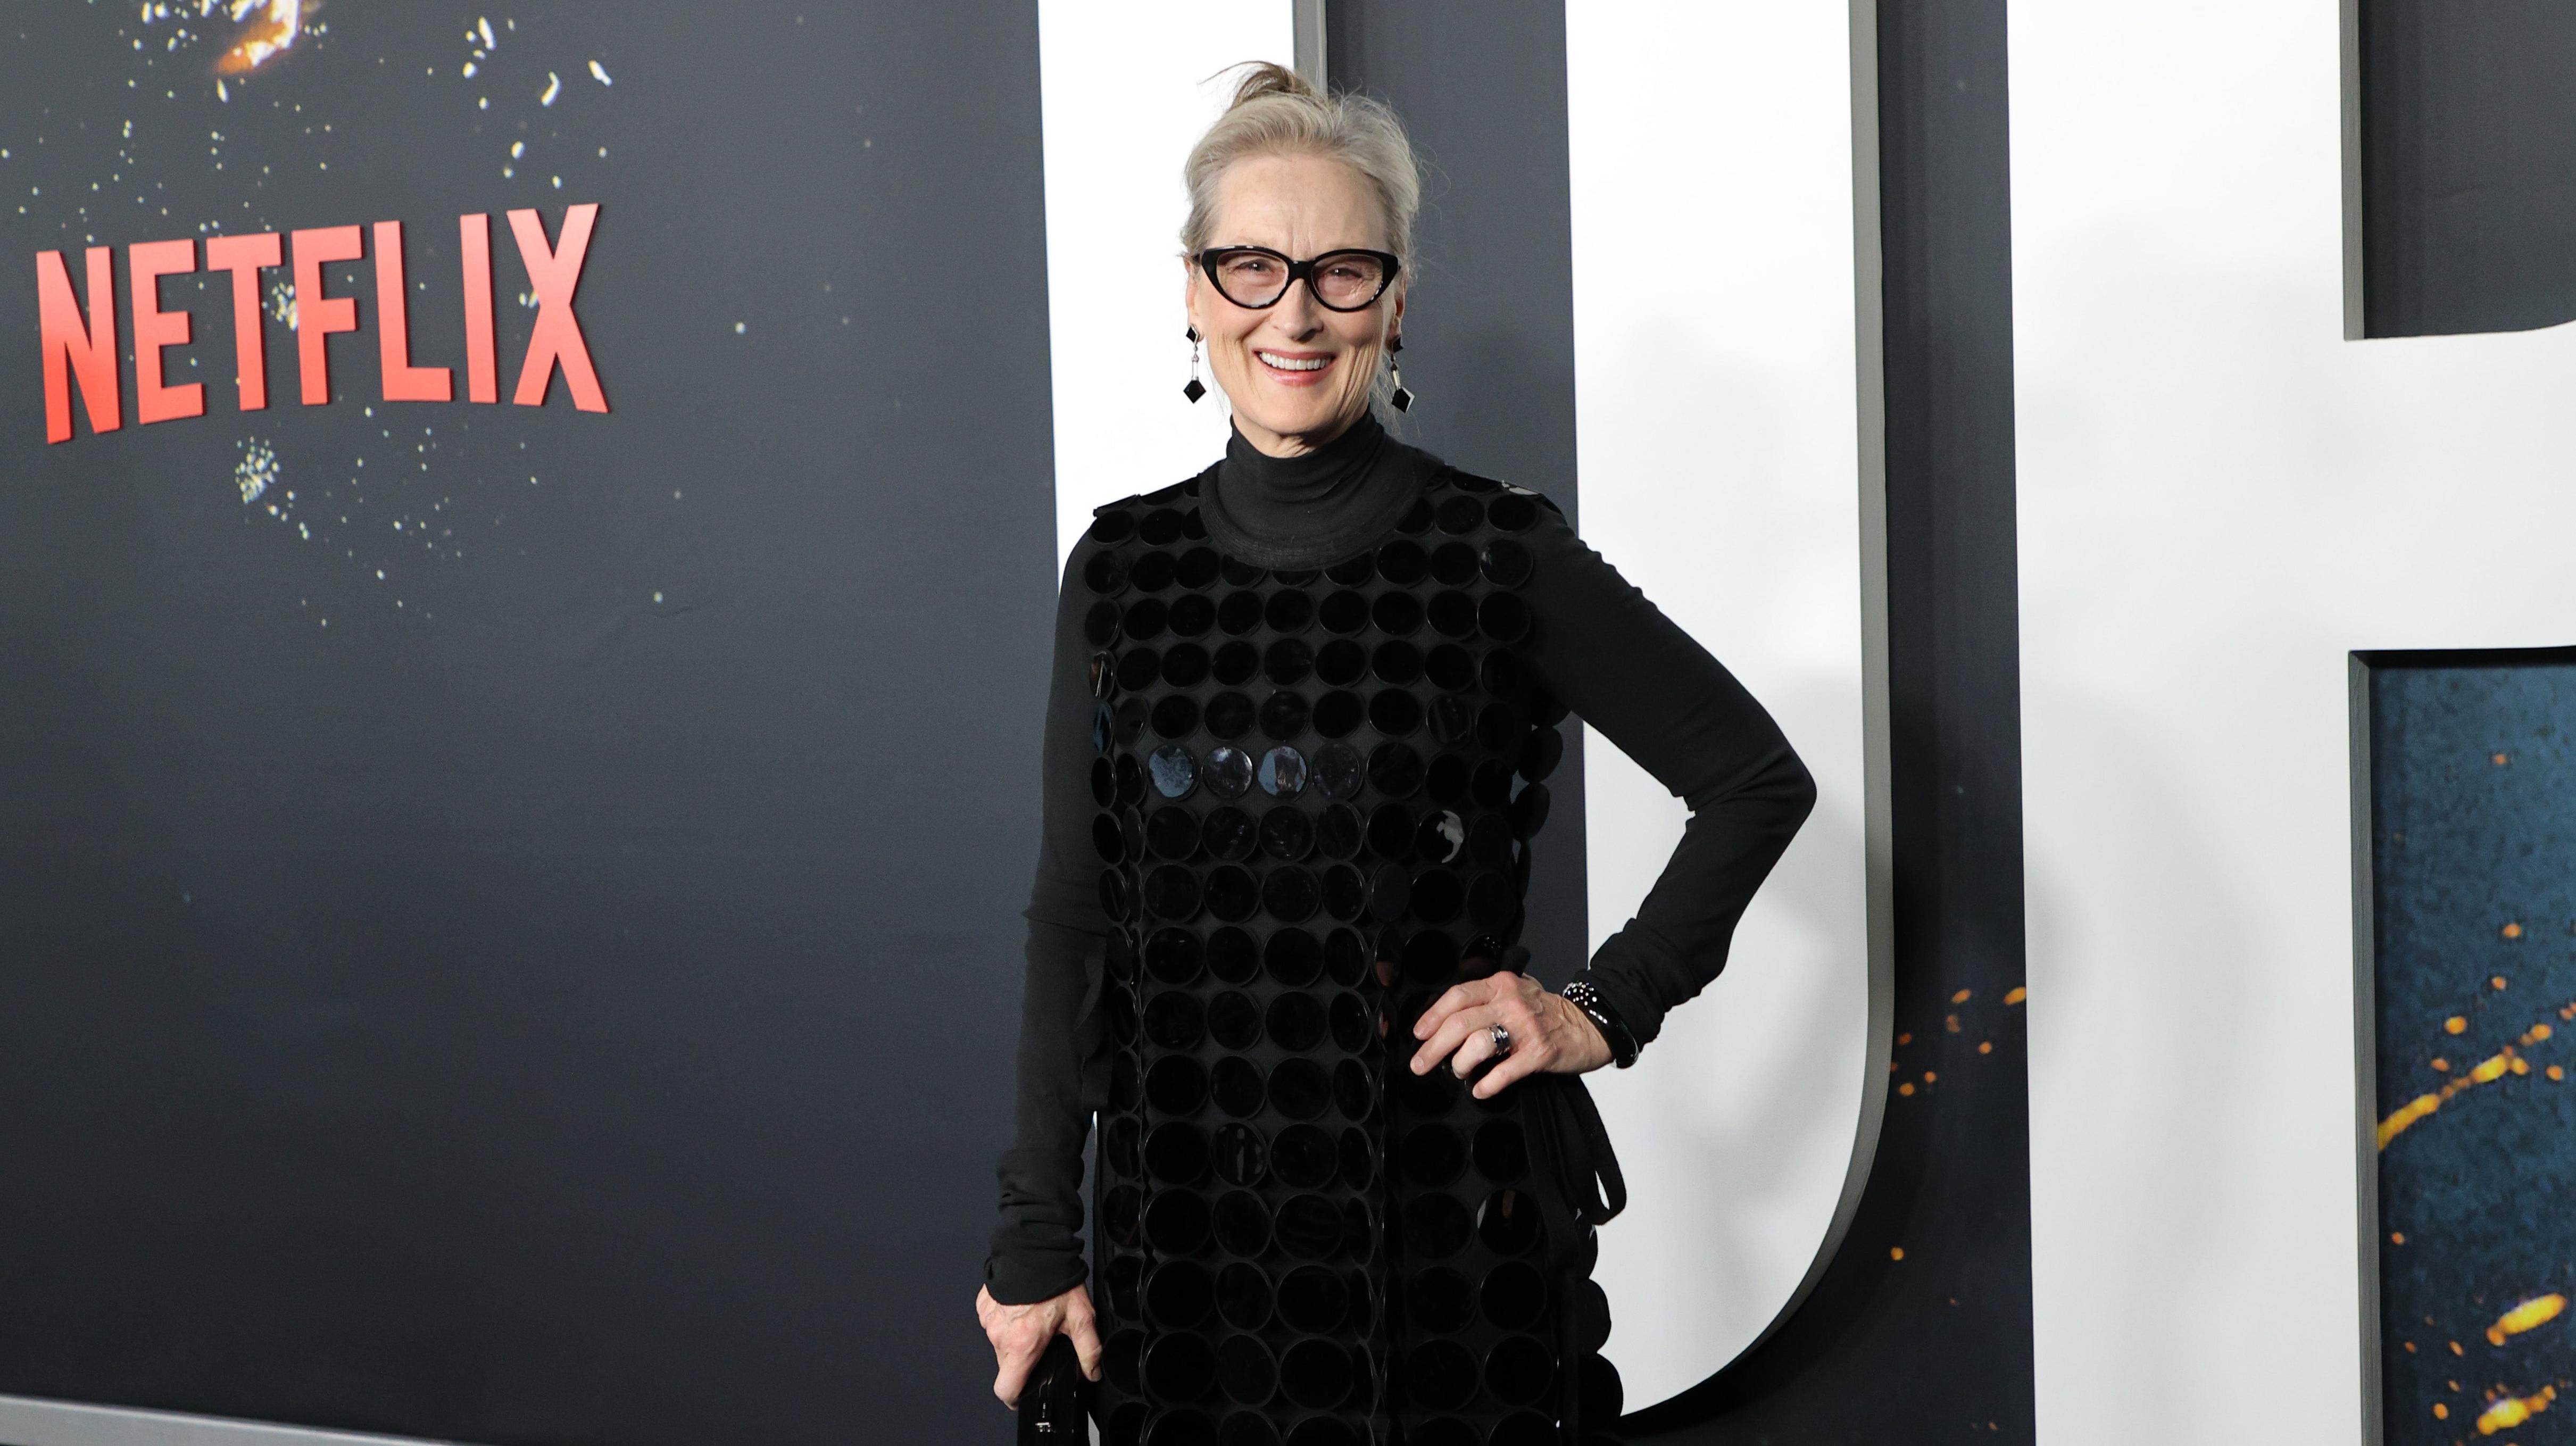 Unsurprisingly, 72-year-old Meryl Streep did not know what the slang term G.O.A.T. meant